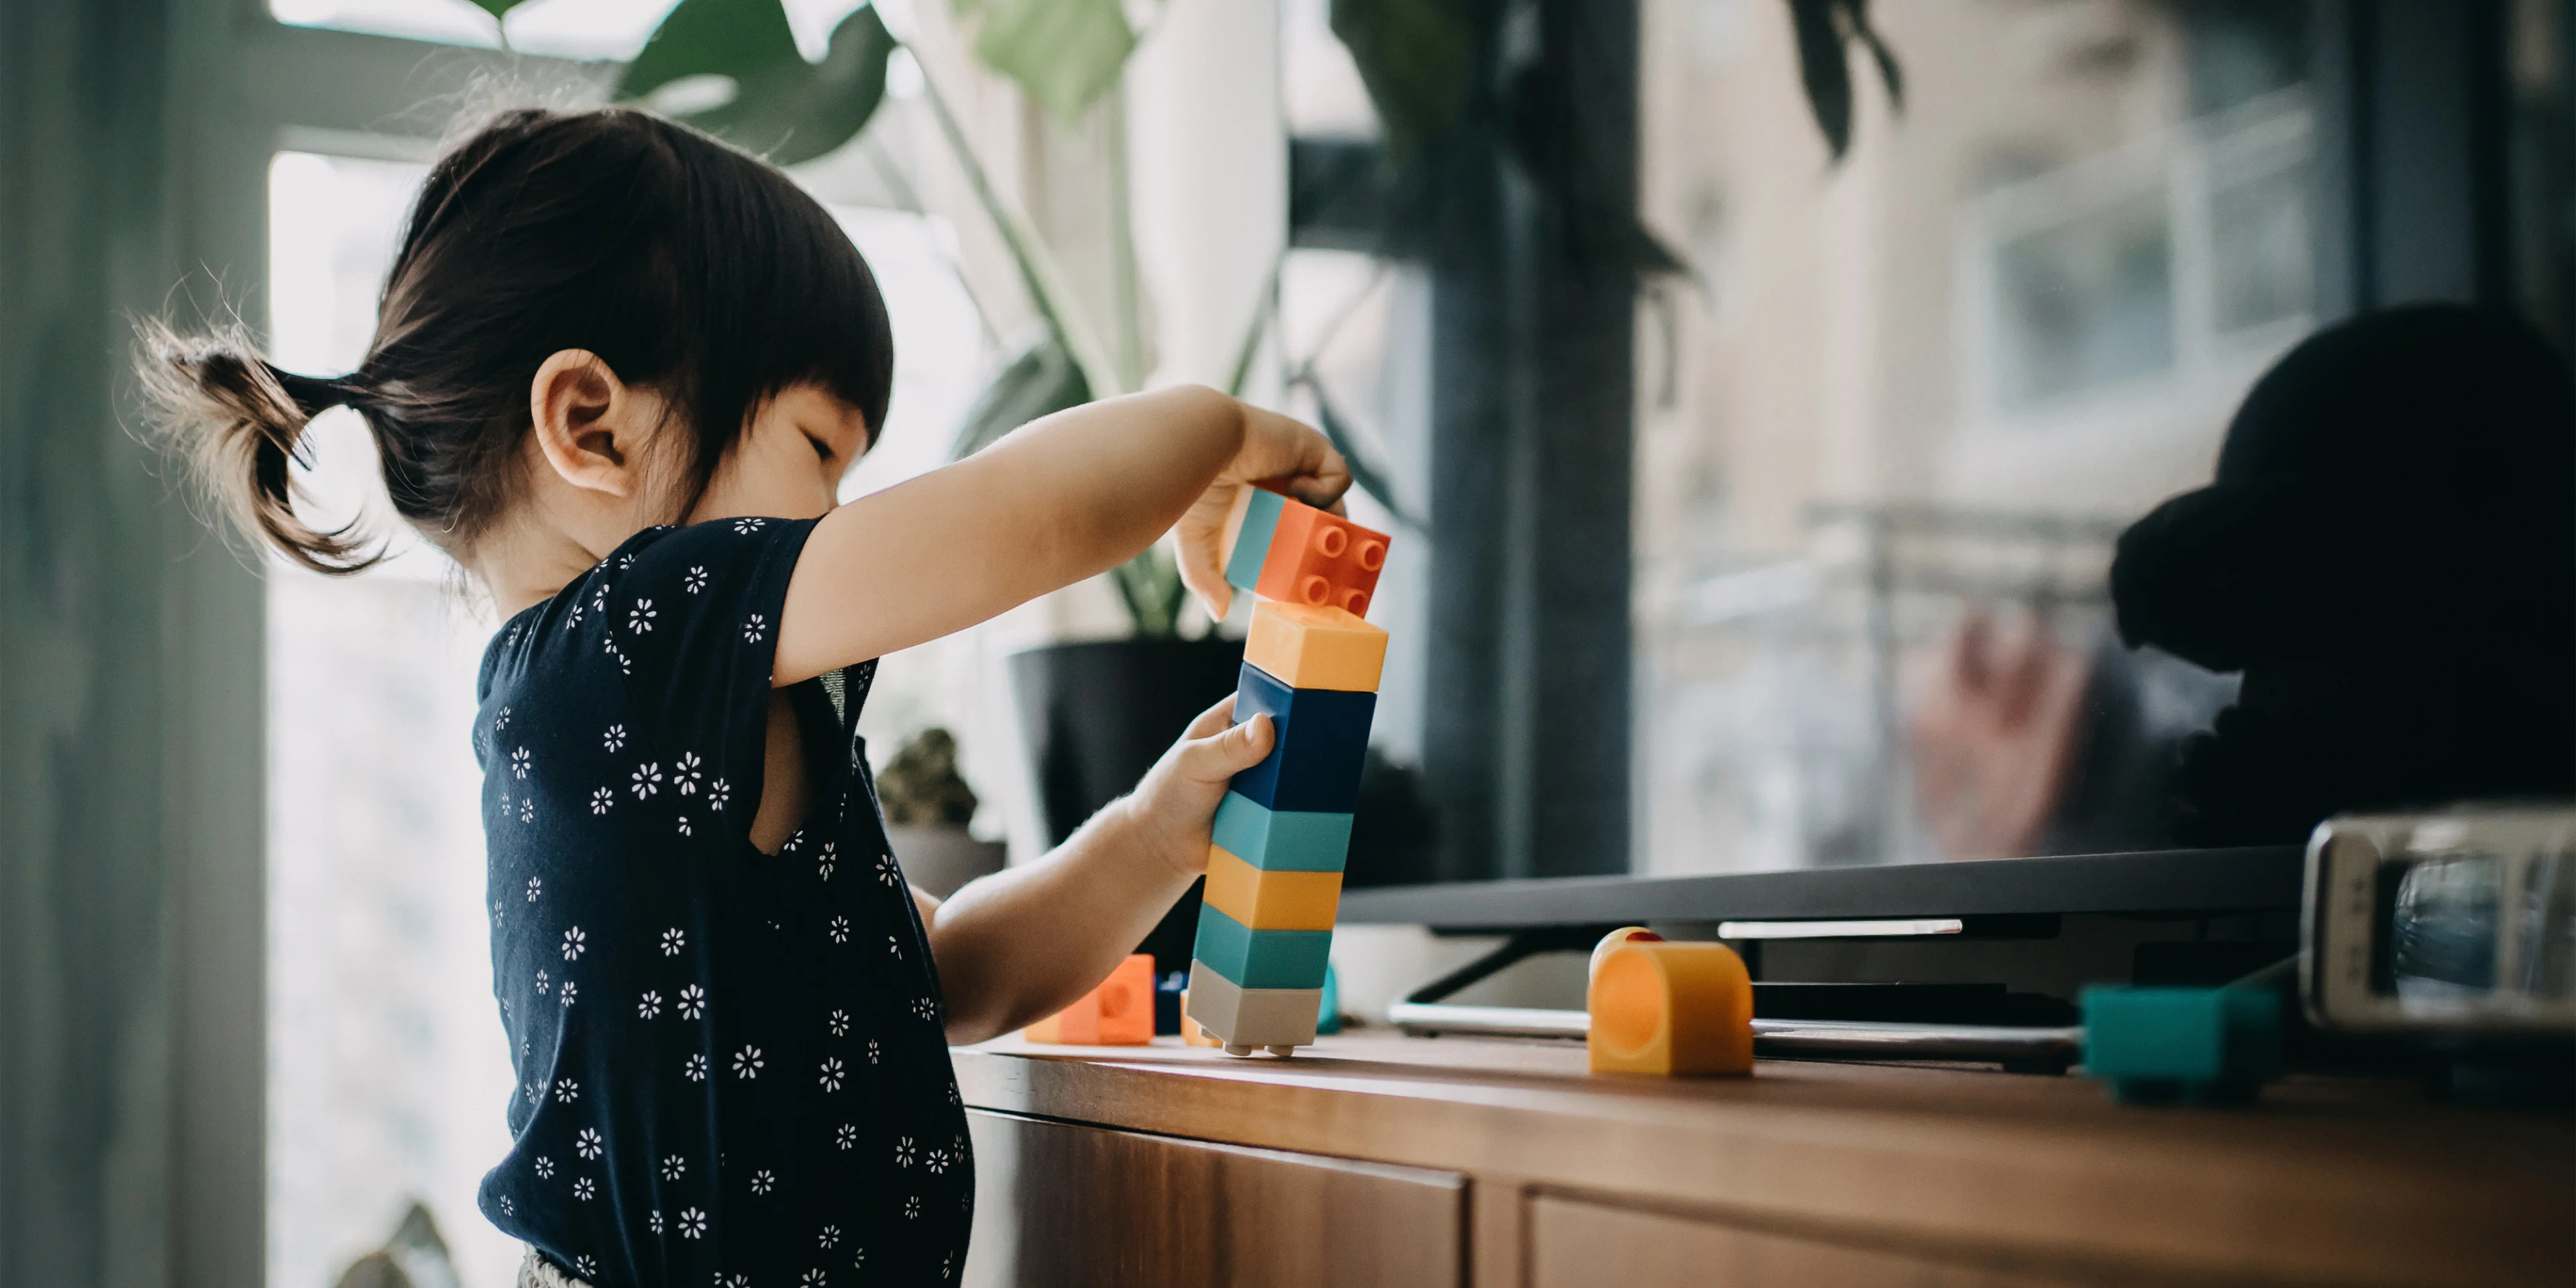 Toddler playing with colorful building blocks | Neste article